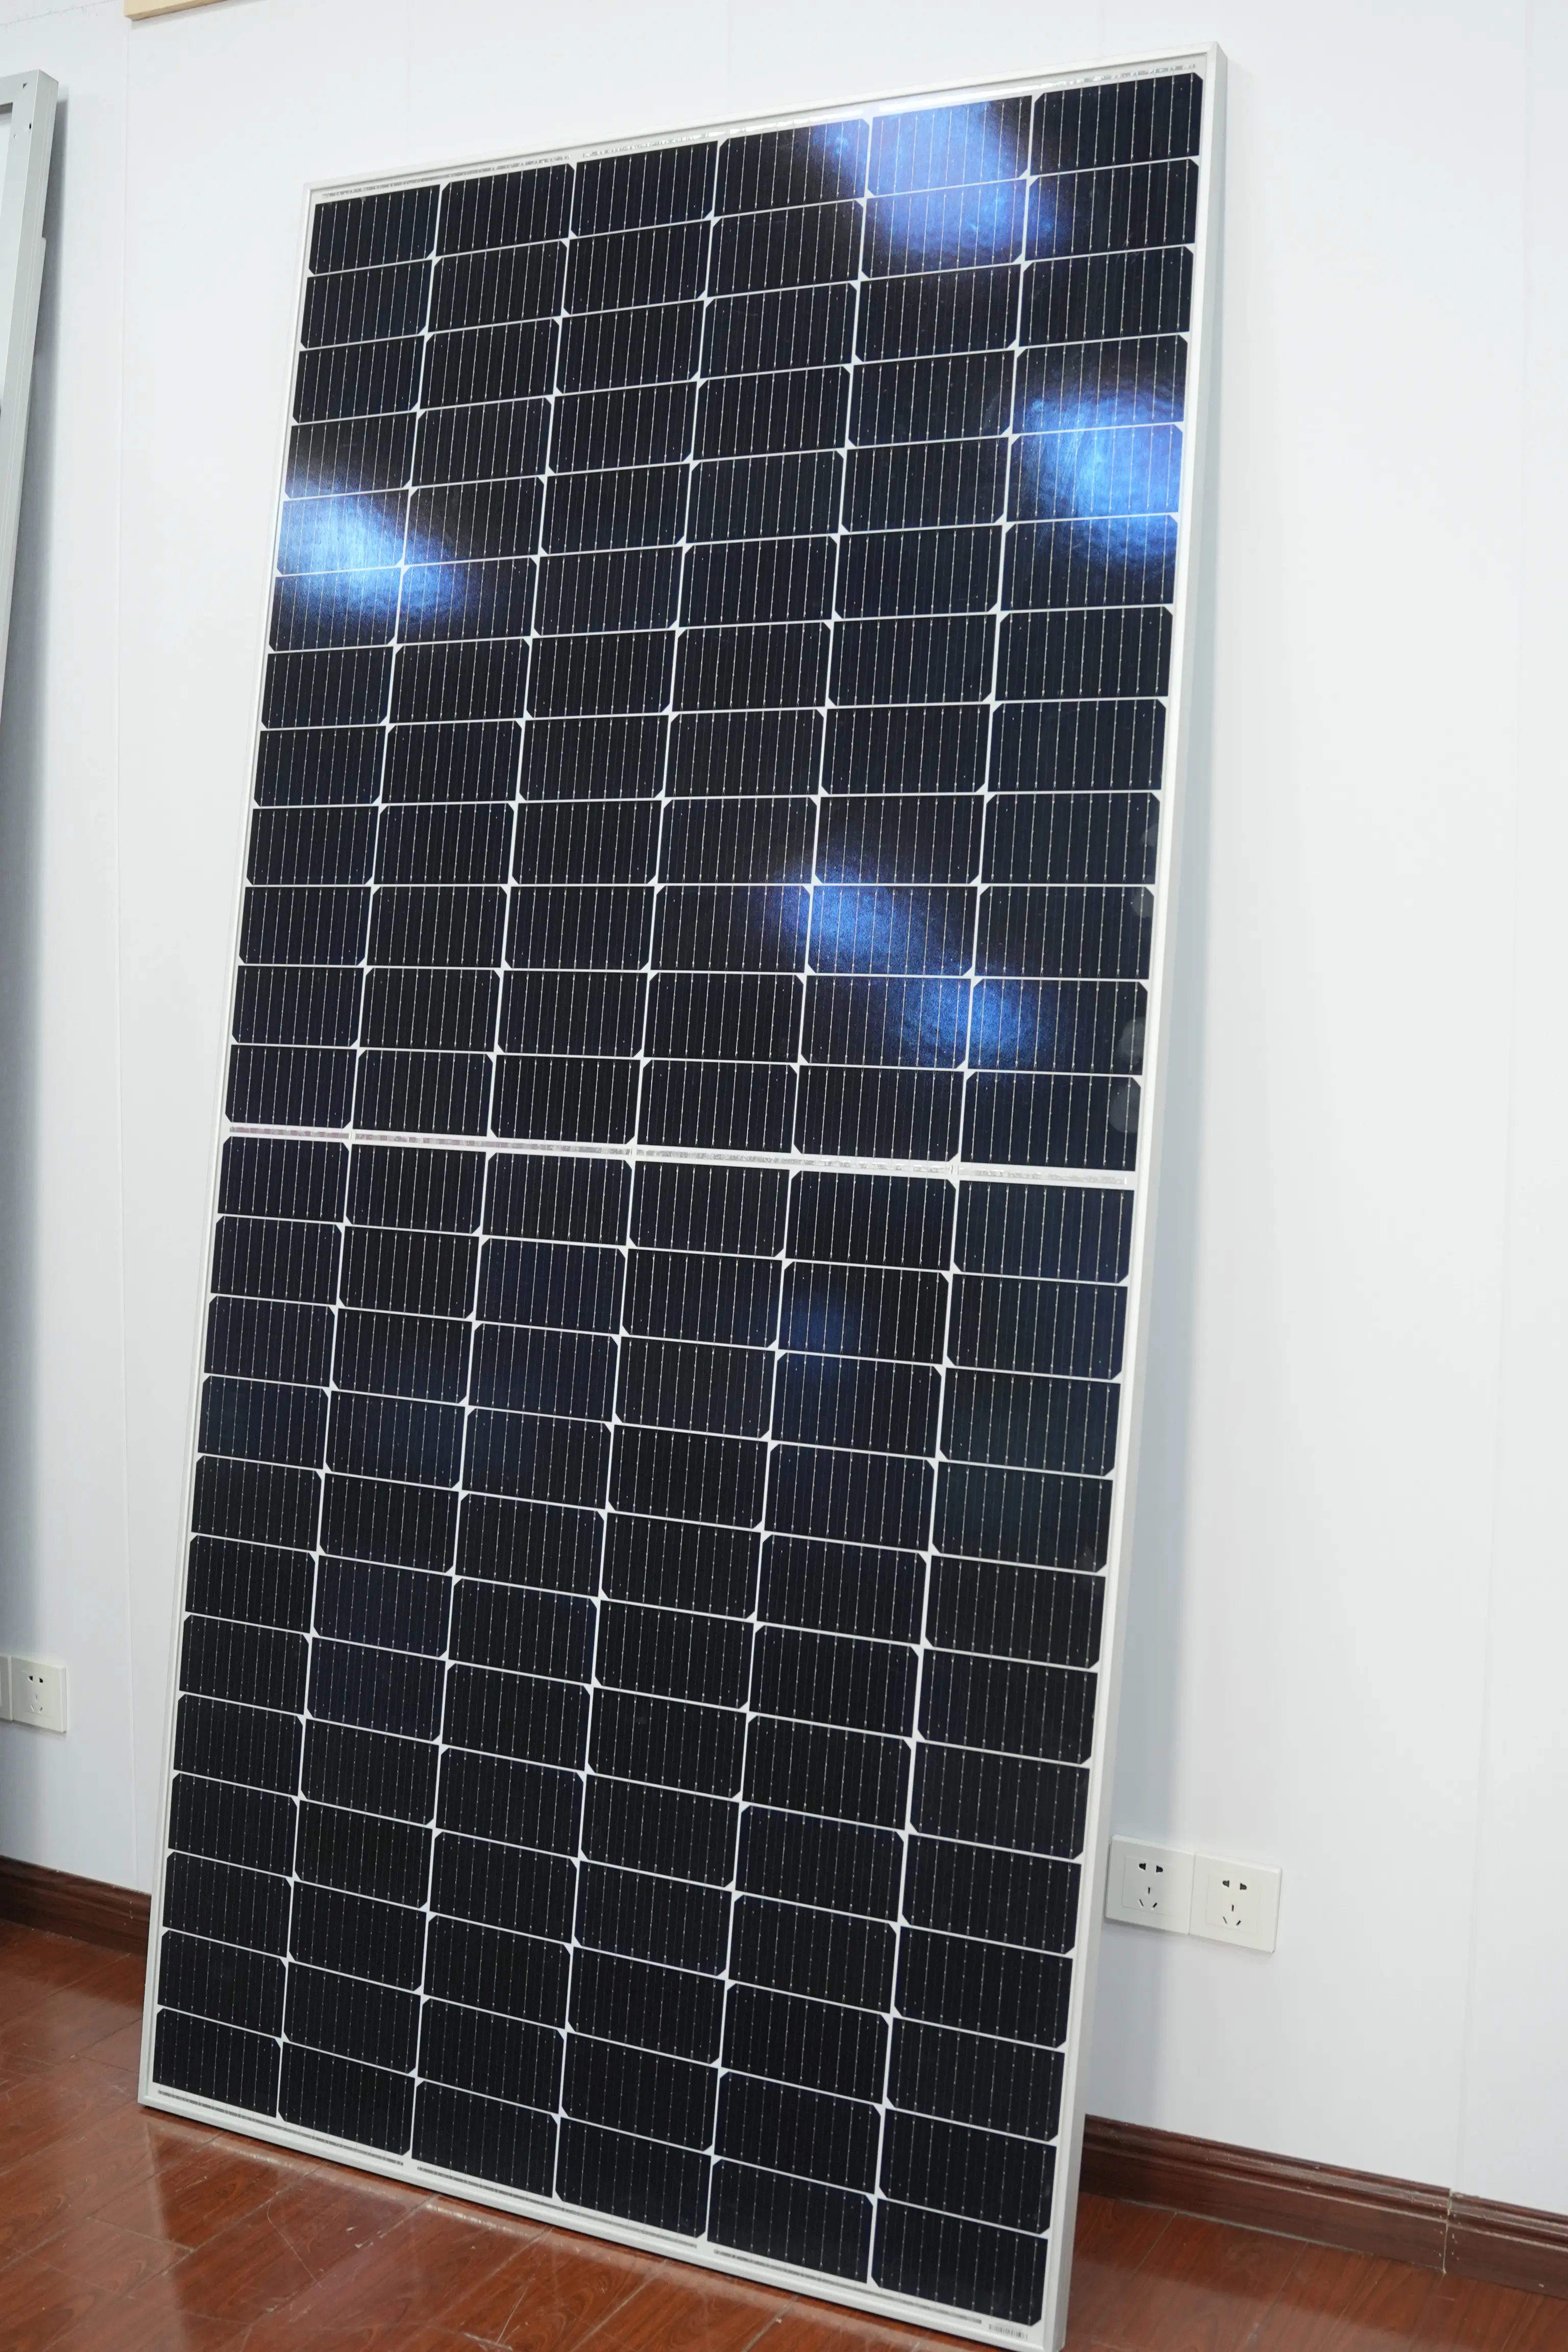 Best Solar Panels In The World M1 350-385W Monocrystalline Silicon Solar Panels Home Using